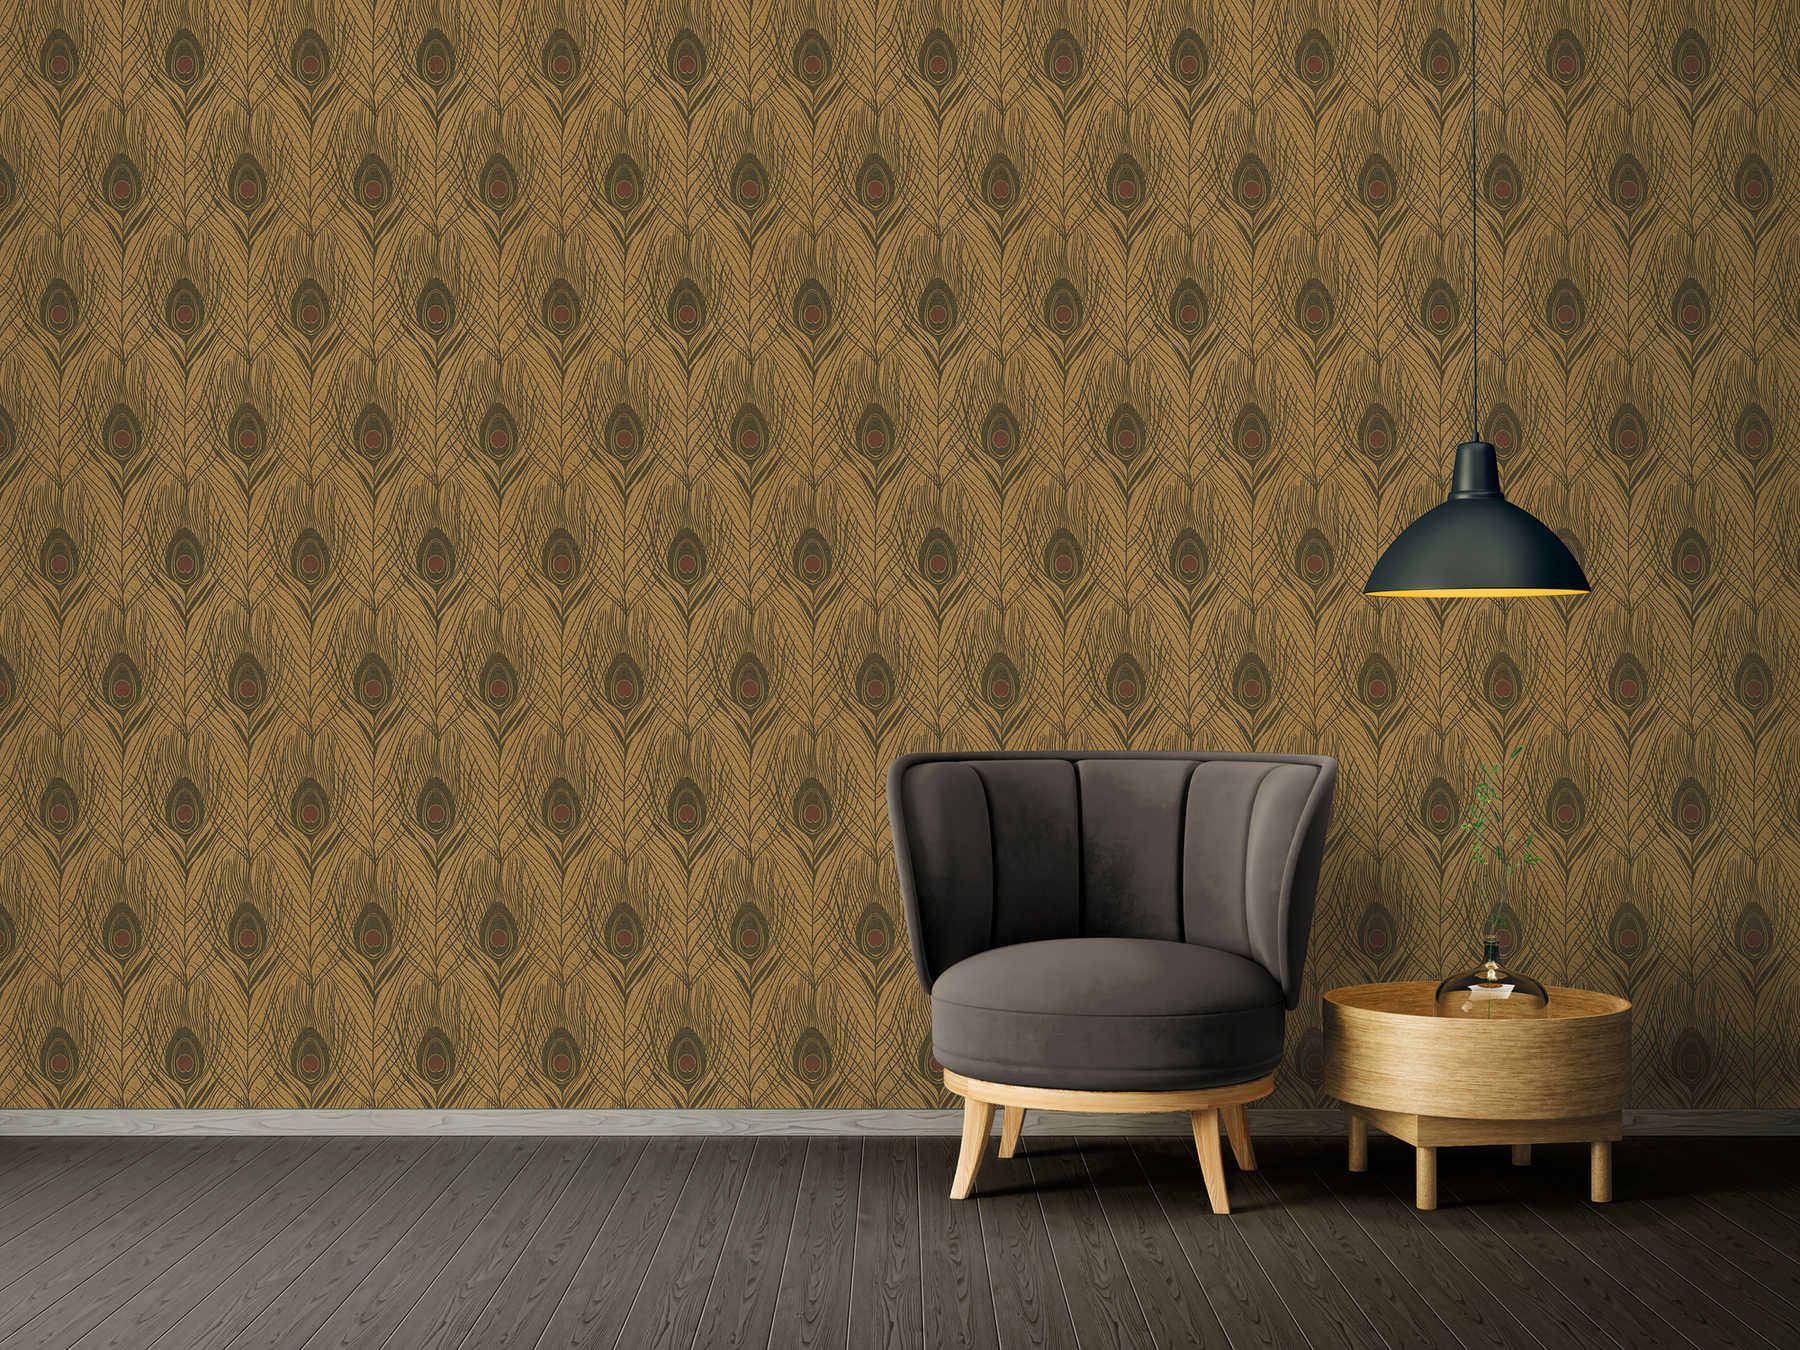             Golden non-woven wallpaper with peacock feathers - black, gold, brown
        